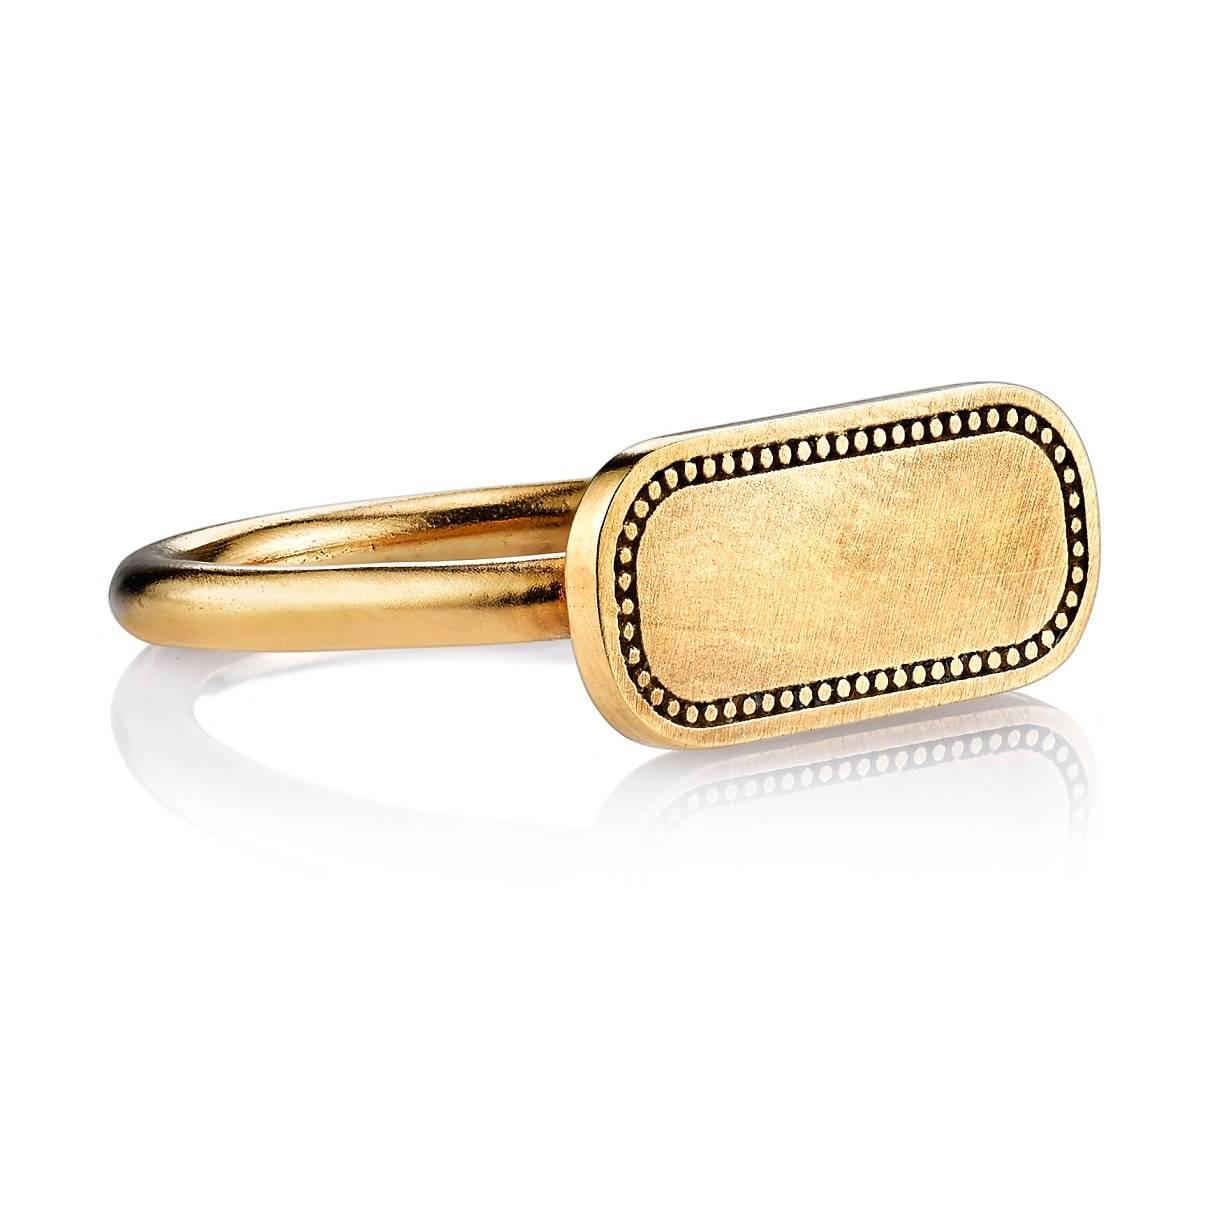 Vintage inspired handcrafted 18k yellow gold signet ring with an oxidized beaded frame. A modern take on the classic signet ring. Make it personal! Our Milo ring includes engraving of up to three letters.

Please inquire about